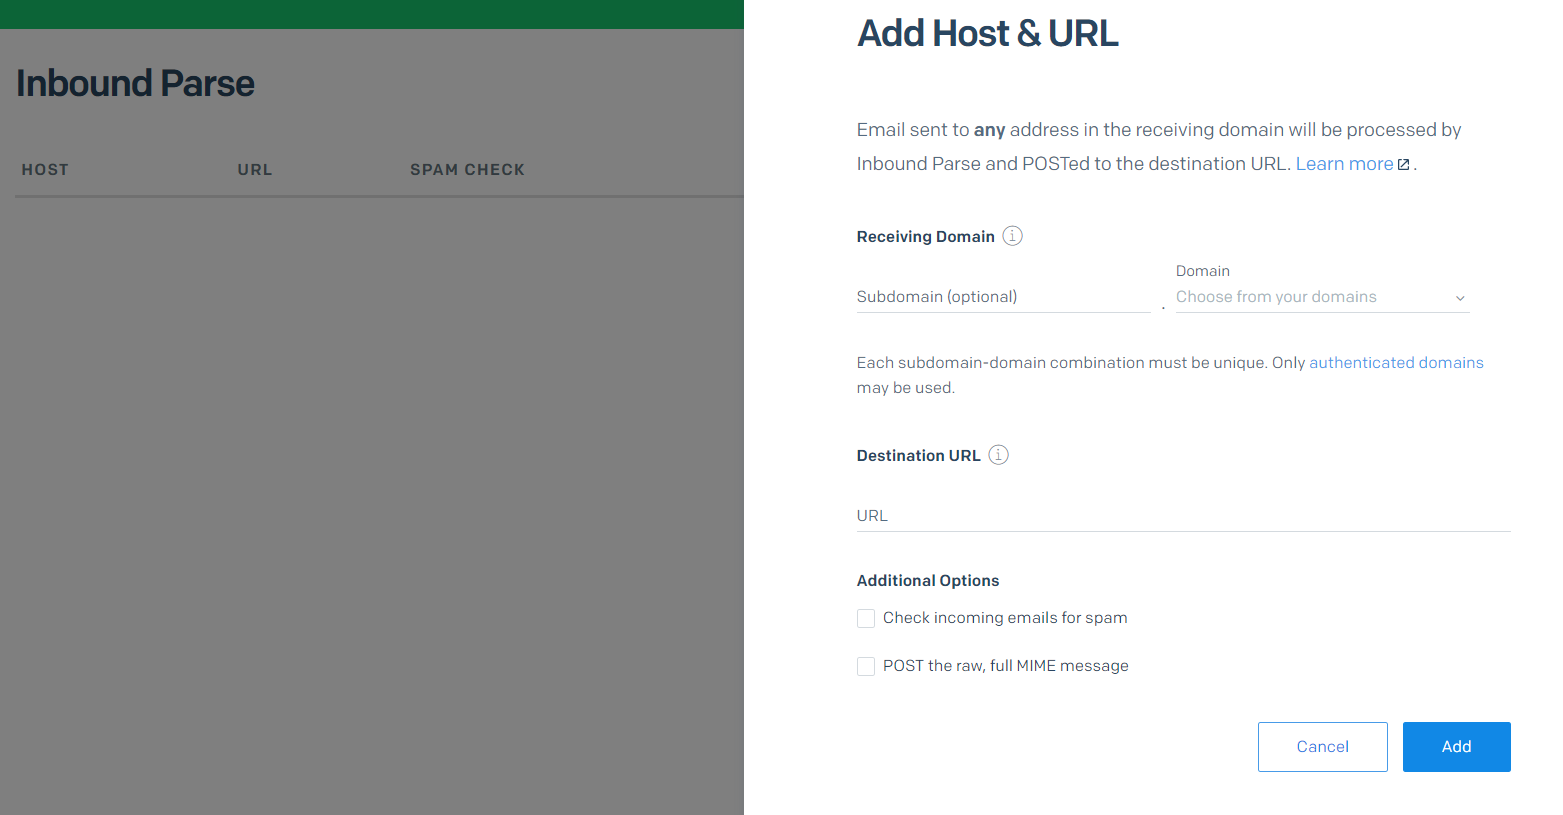 Add Host & URL form with a subdomain text field, a domain dropdown field, and a destination URL text field.